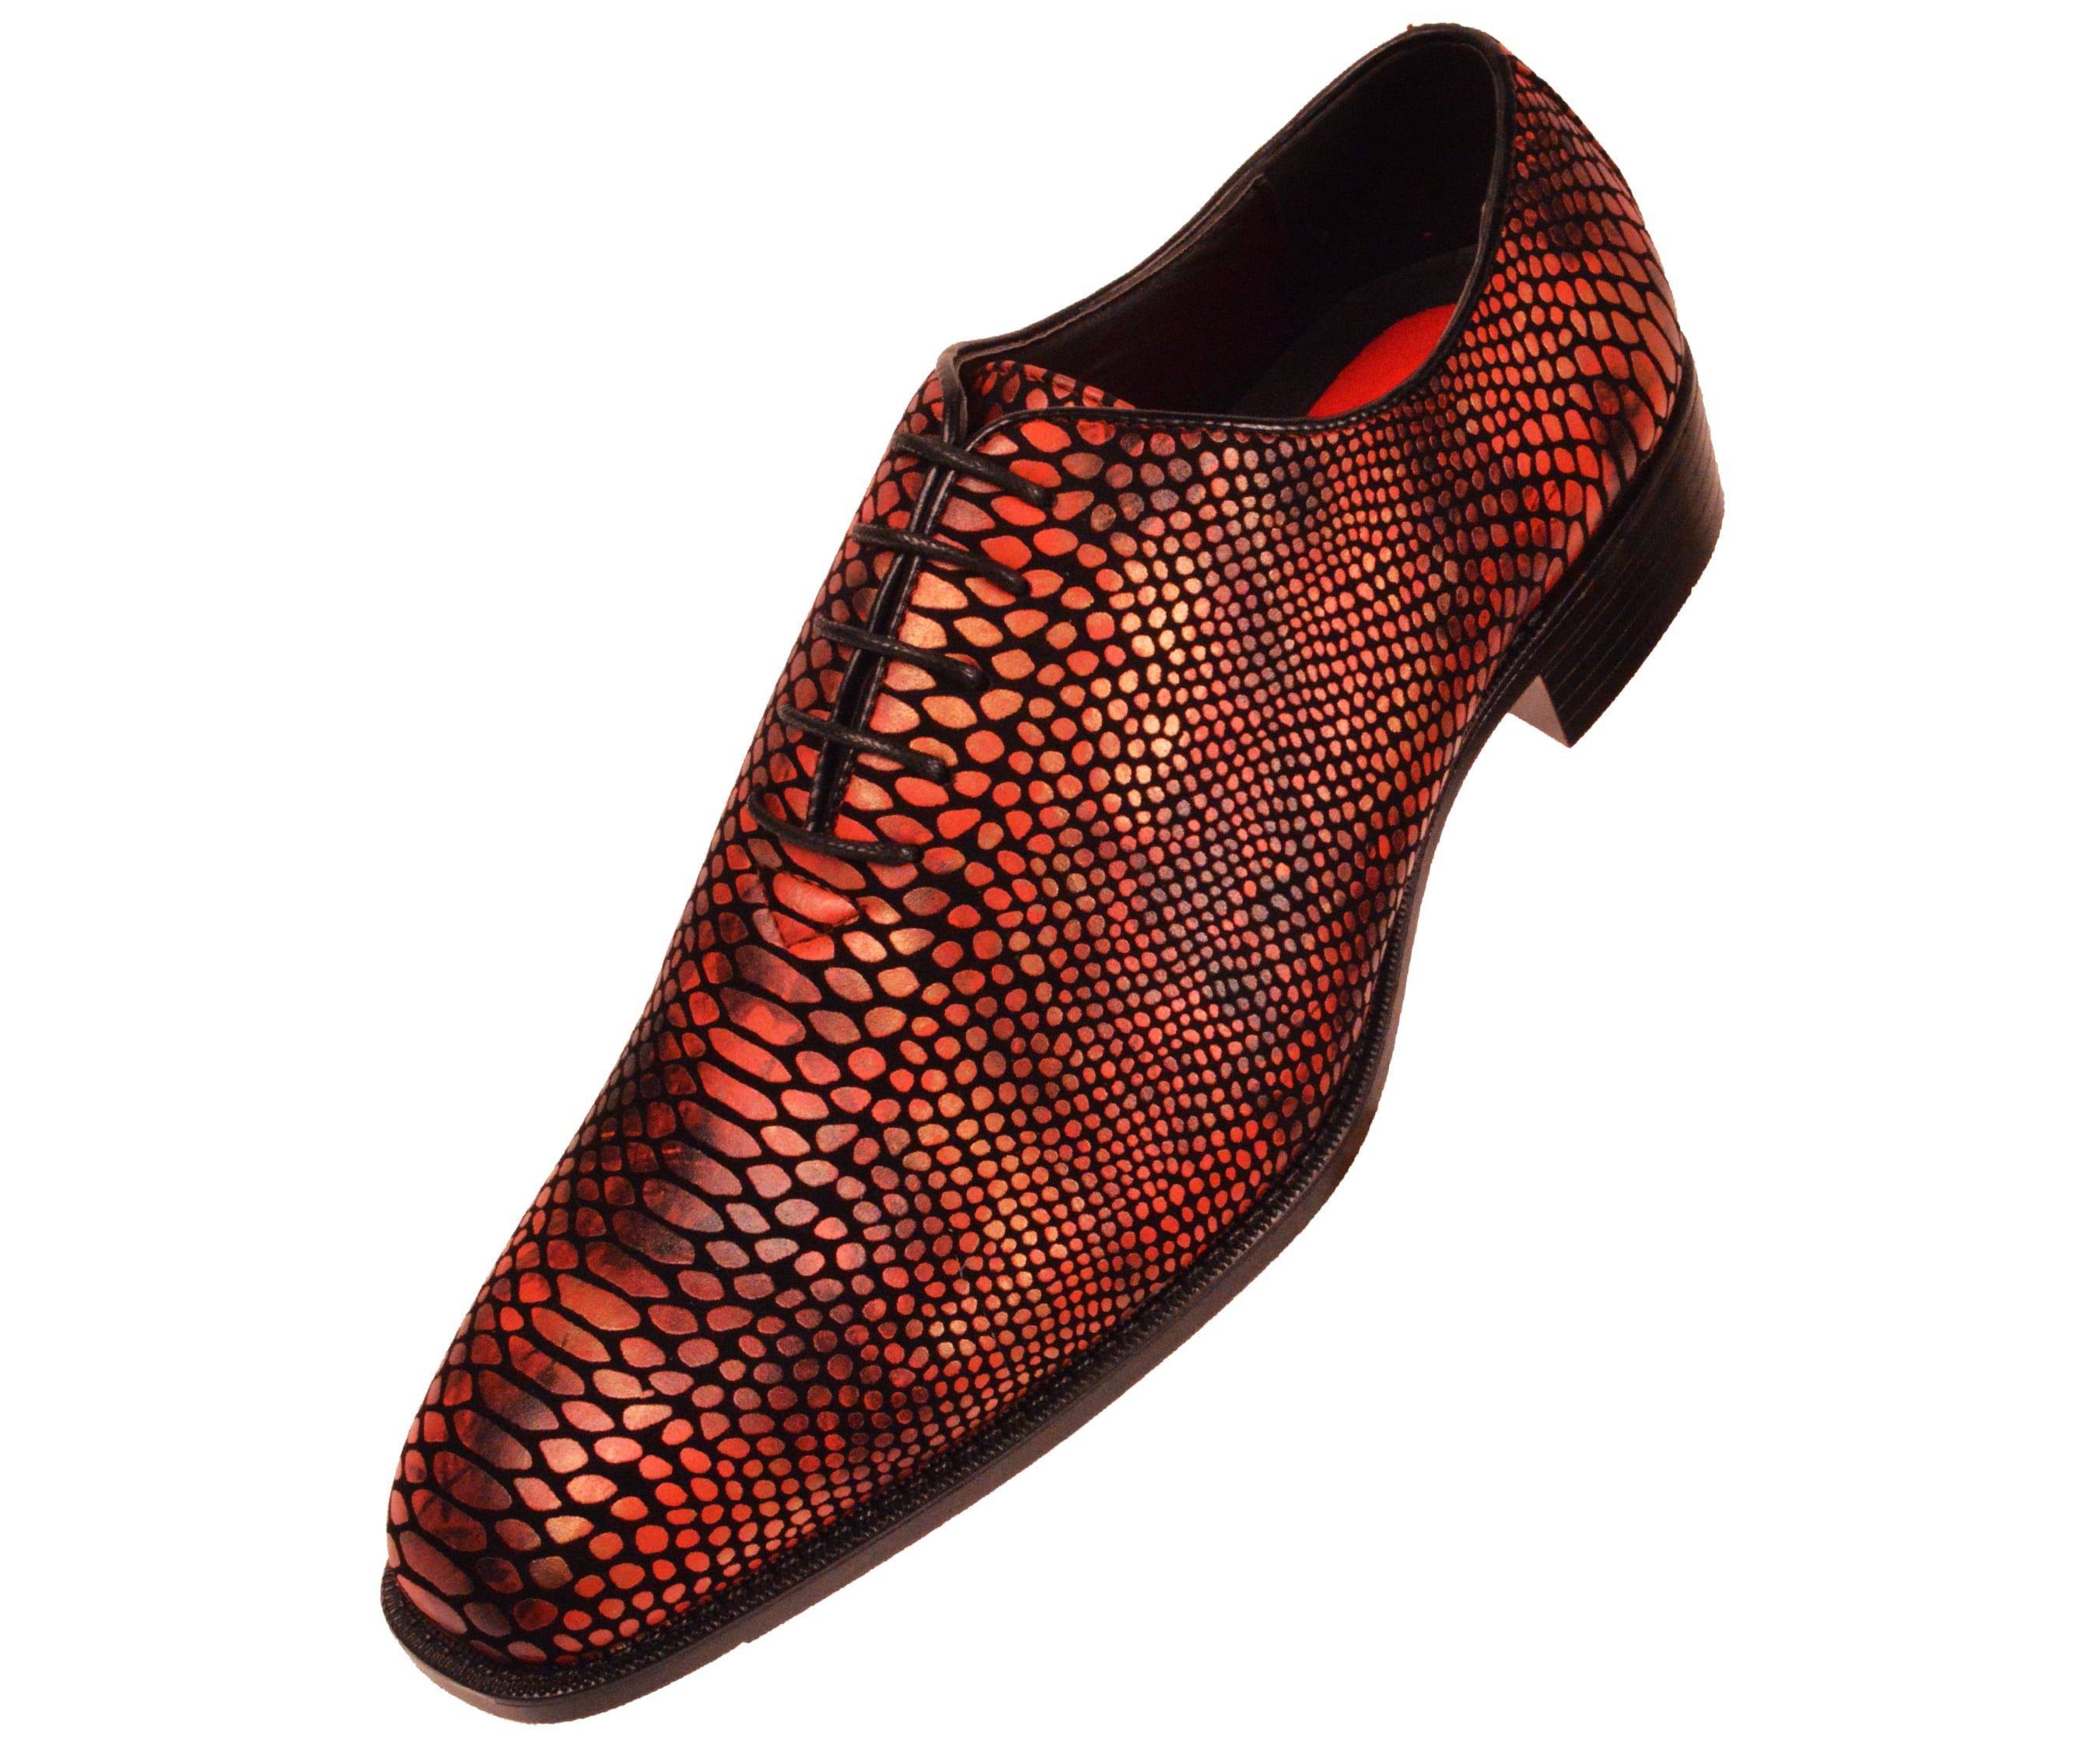 Style Seabrook Bolano The Original Mens Exotic Faux Snake Skin Print Oxford Dress Shoe